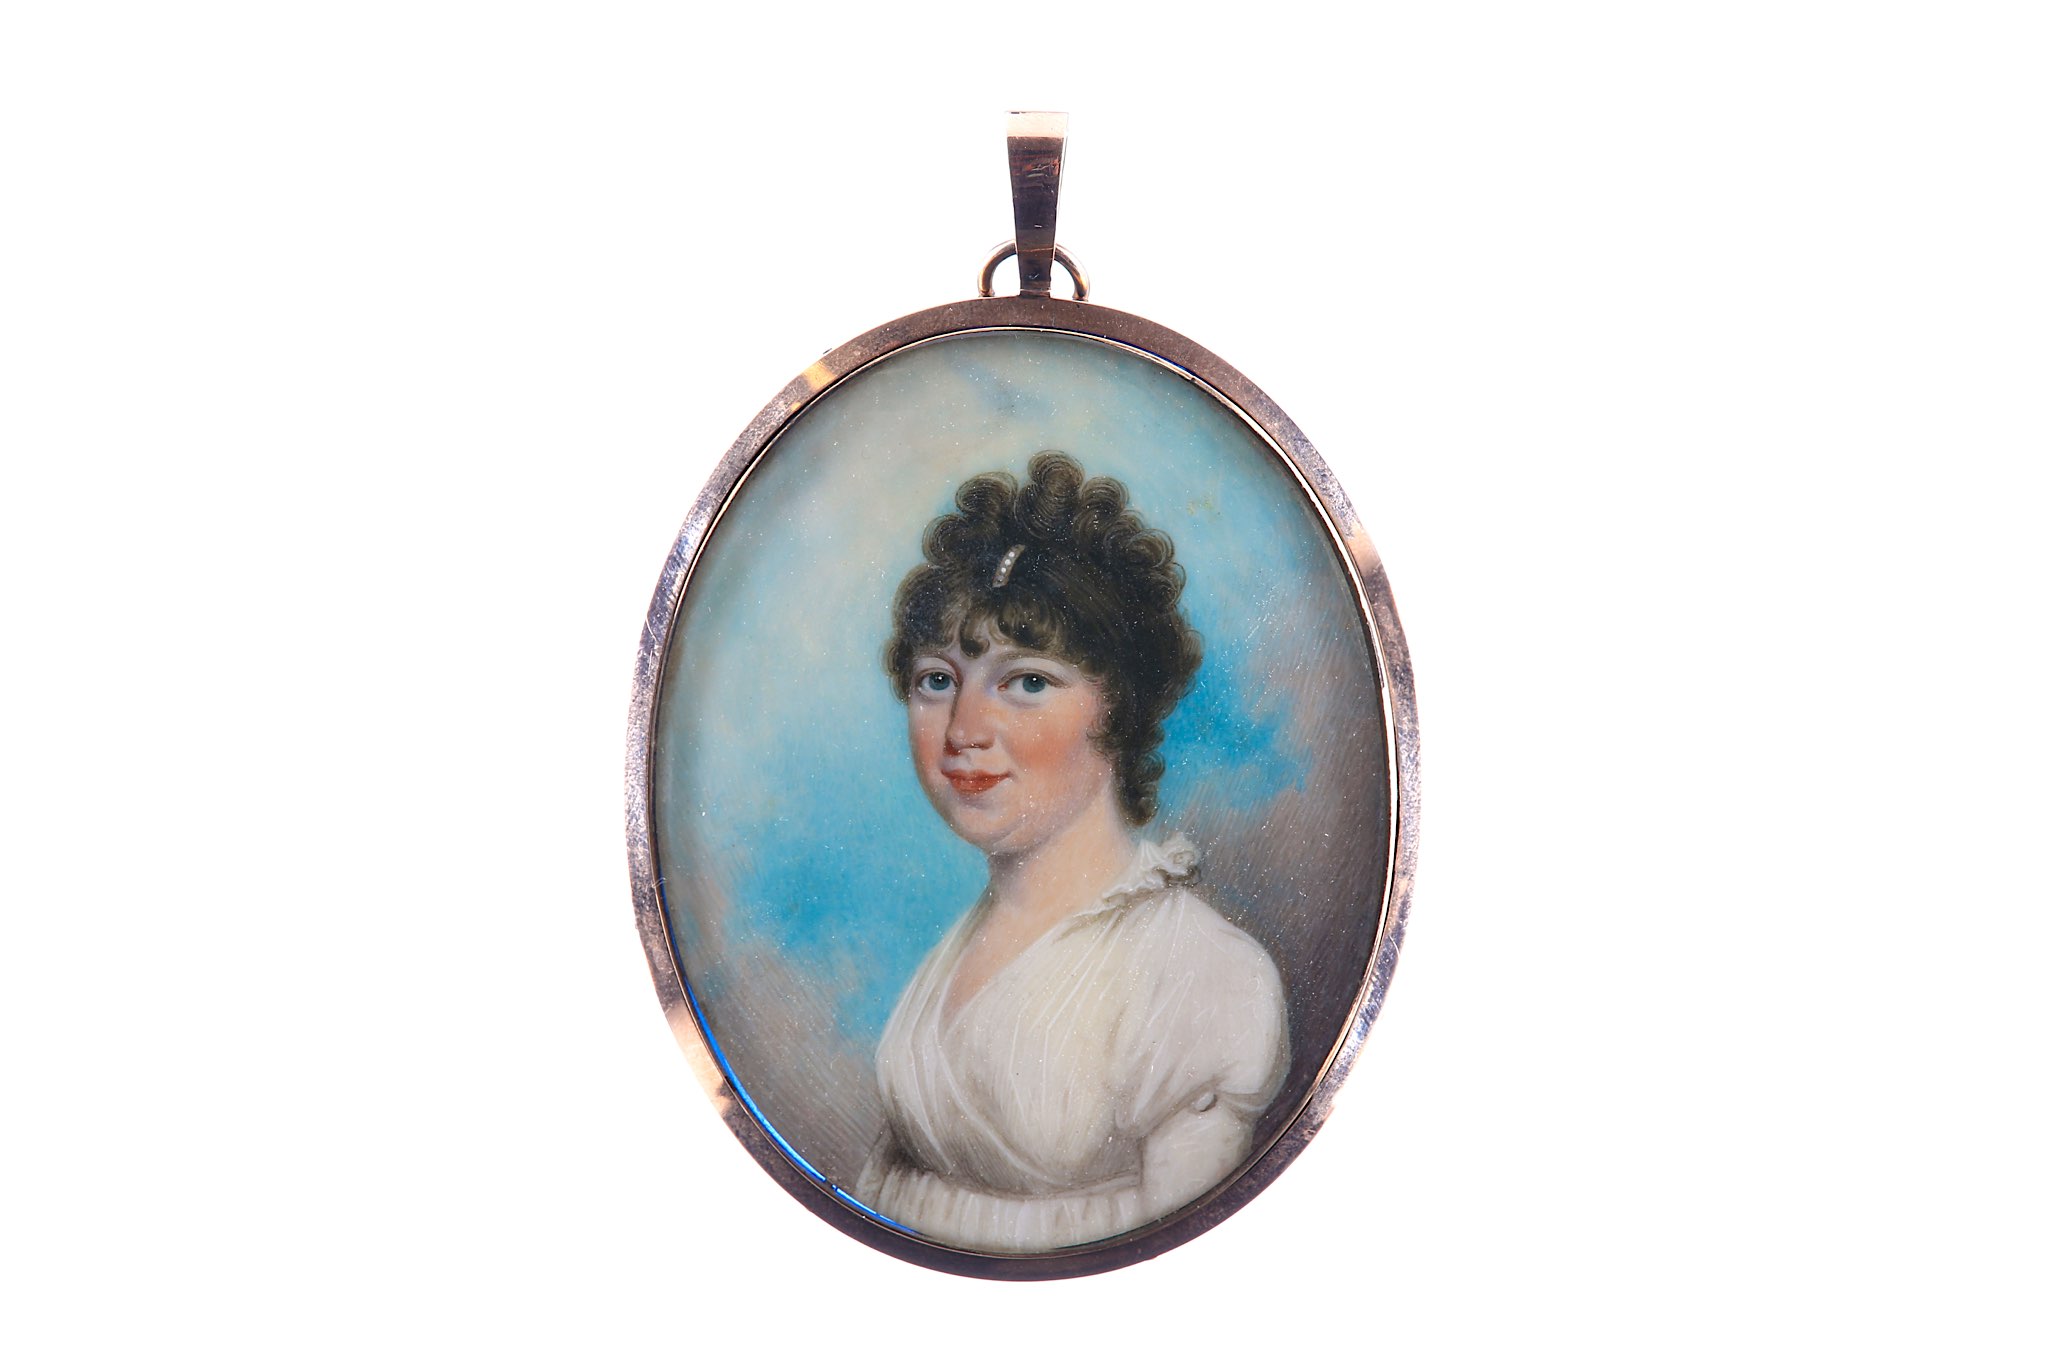 N. FREESE  (circa 1800). A fine portrait miniature of a Lady, wearing a white dress with frilled